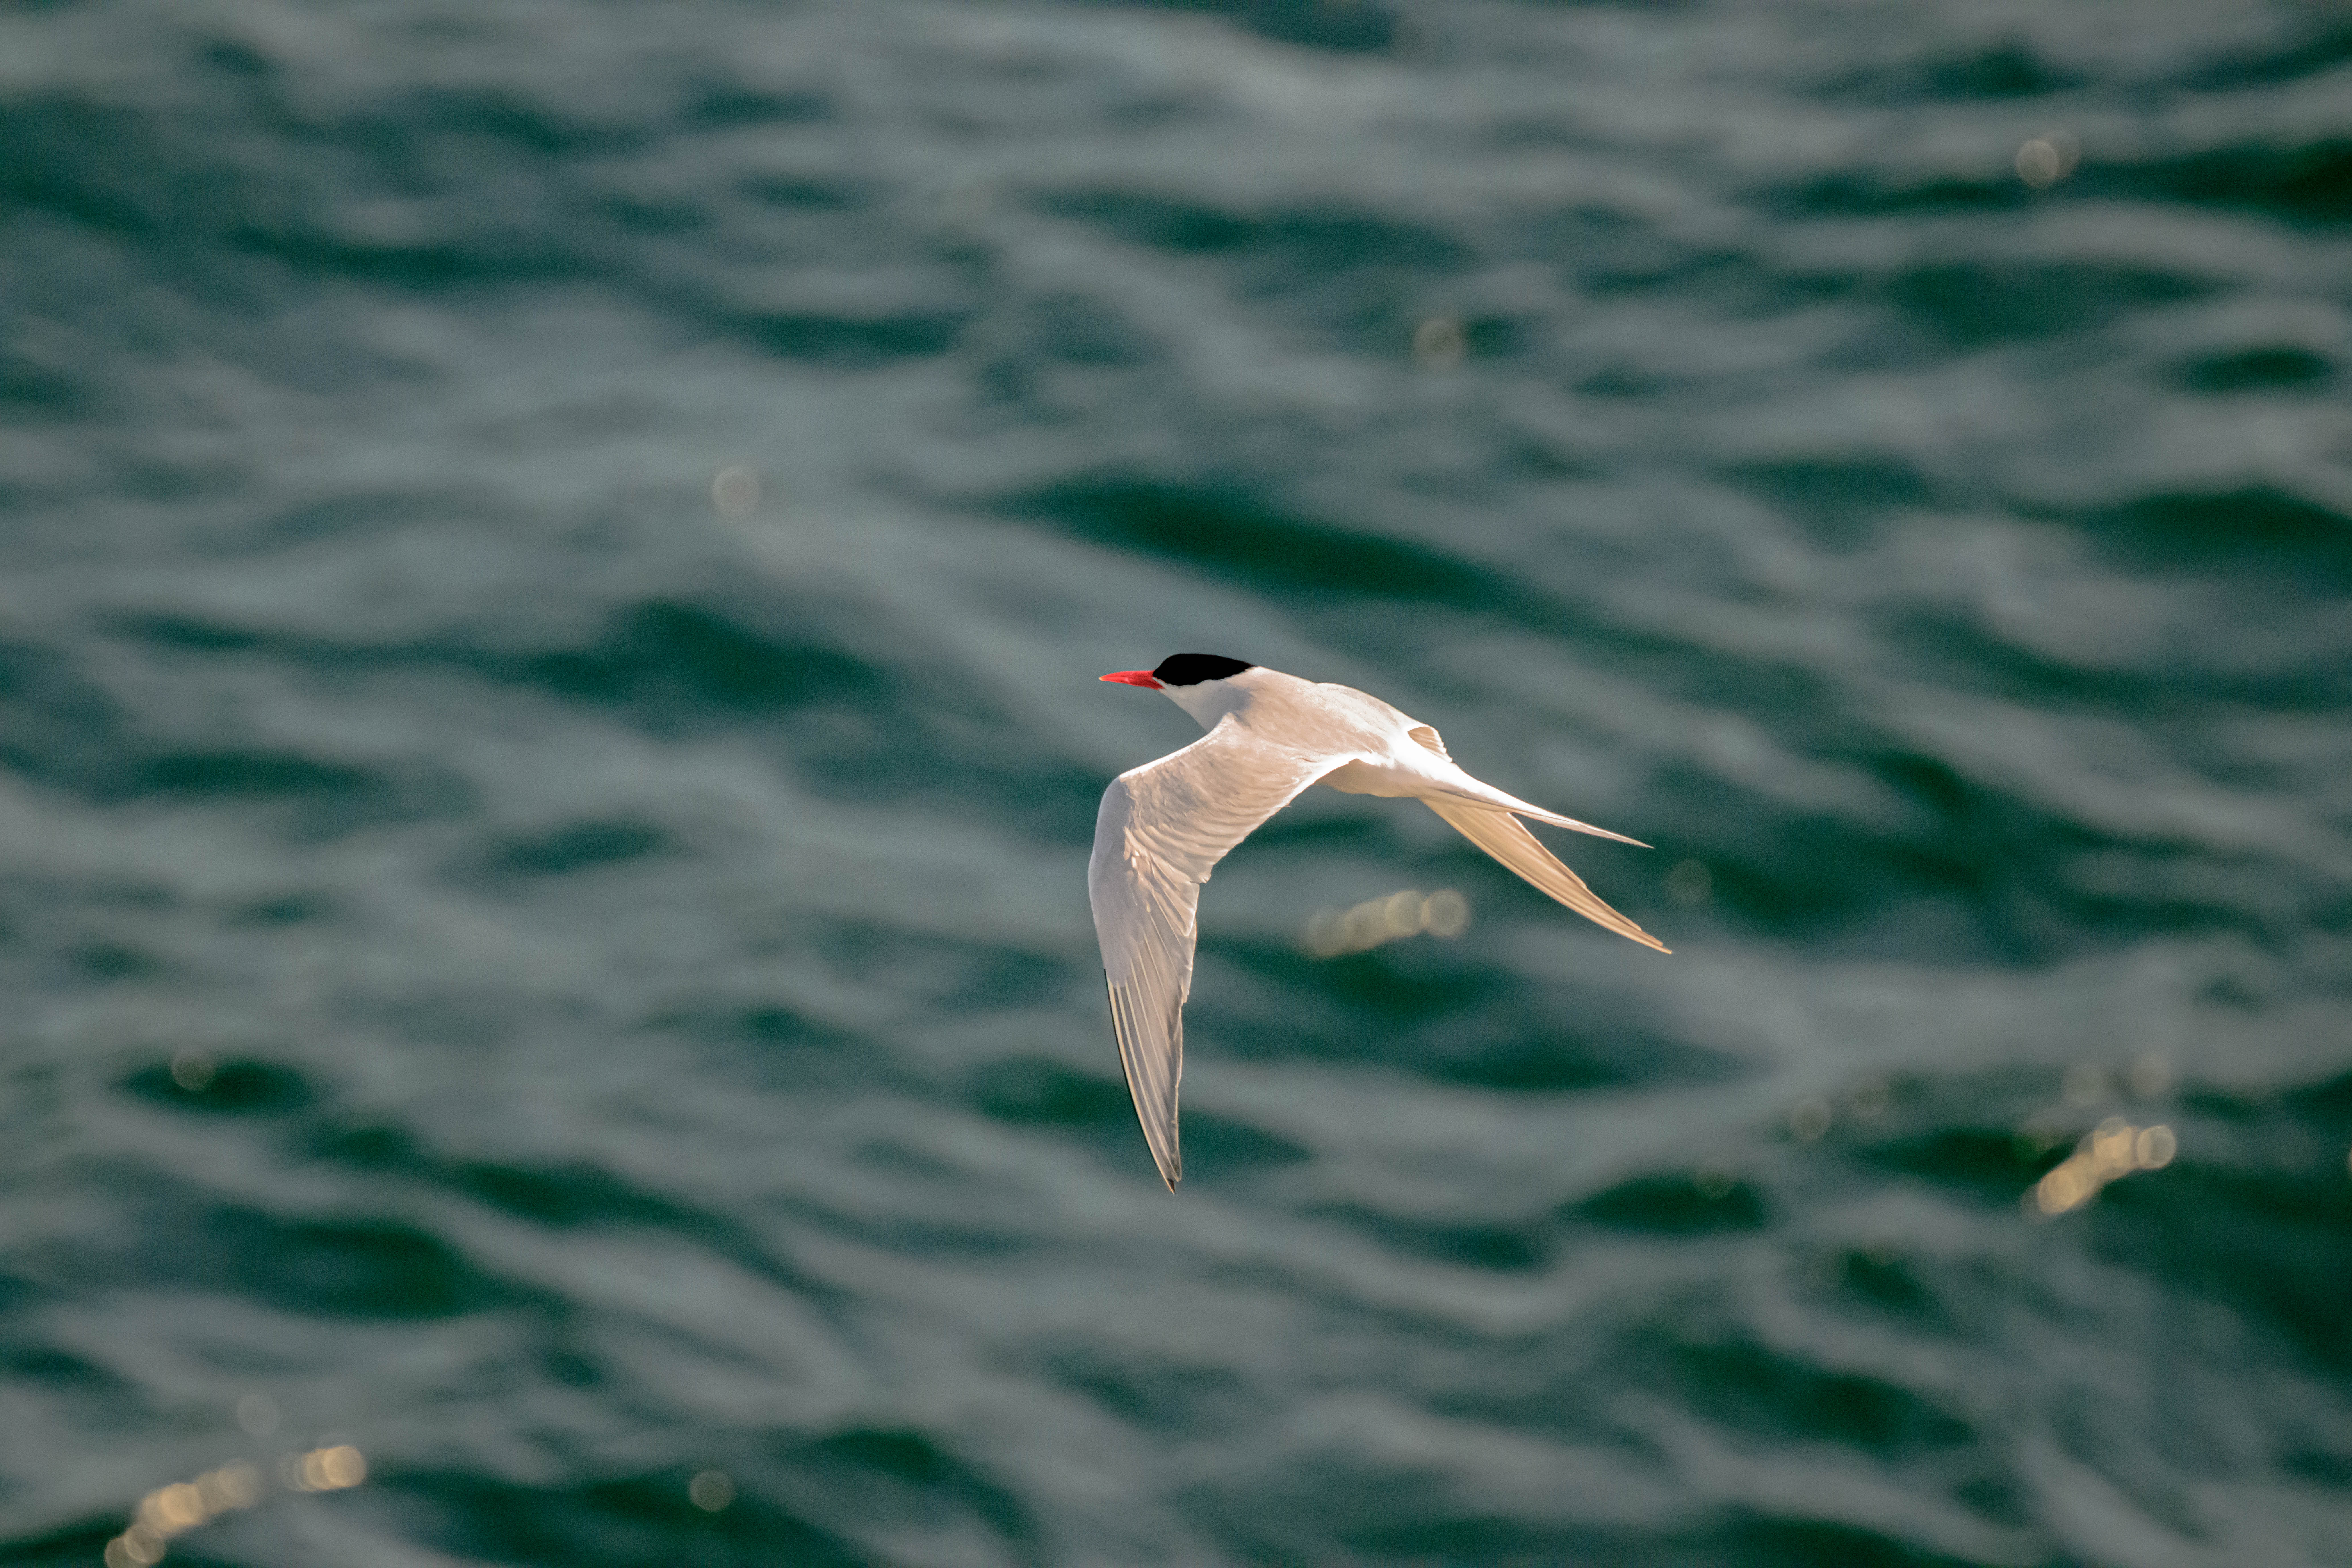 Series ' The 7th Continent ' - South American Tern